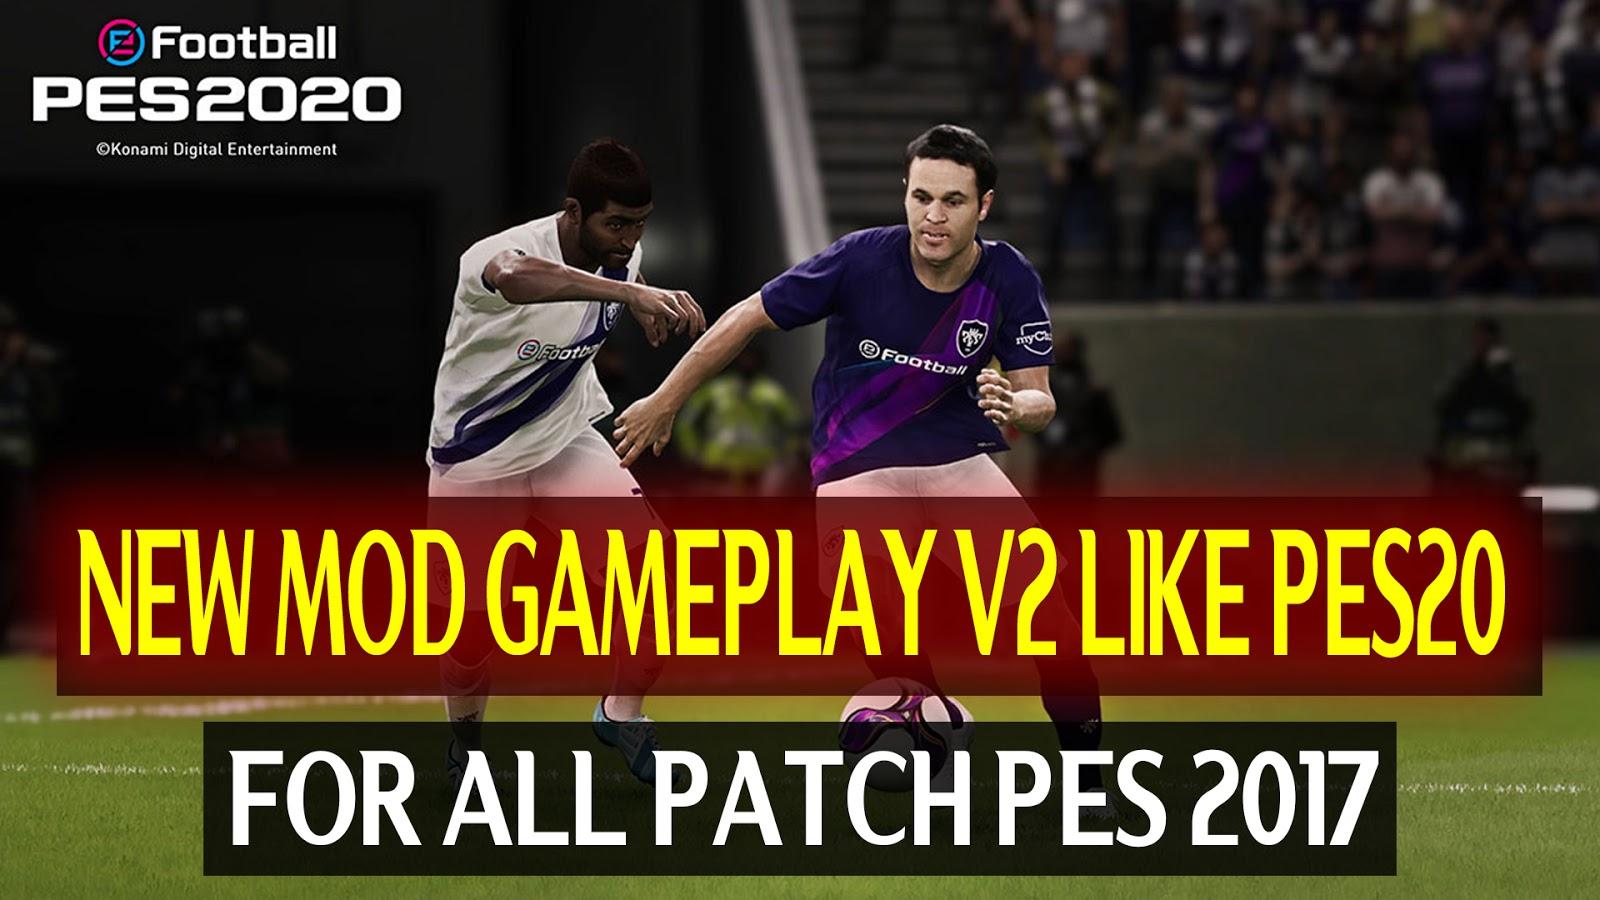 PES2017. NEW GAMEPLAY V2 LIKE PES2020 Patch. FIFA